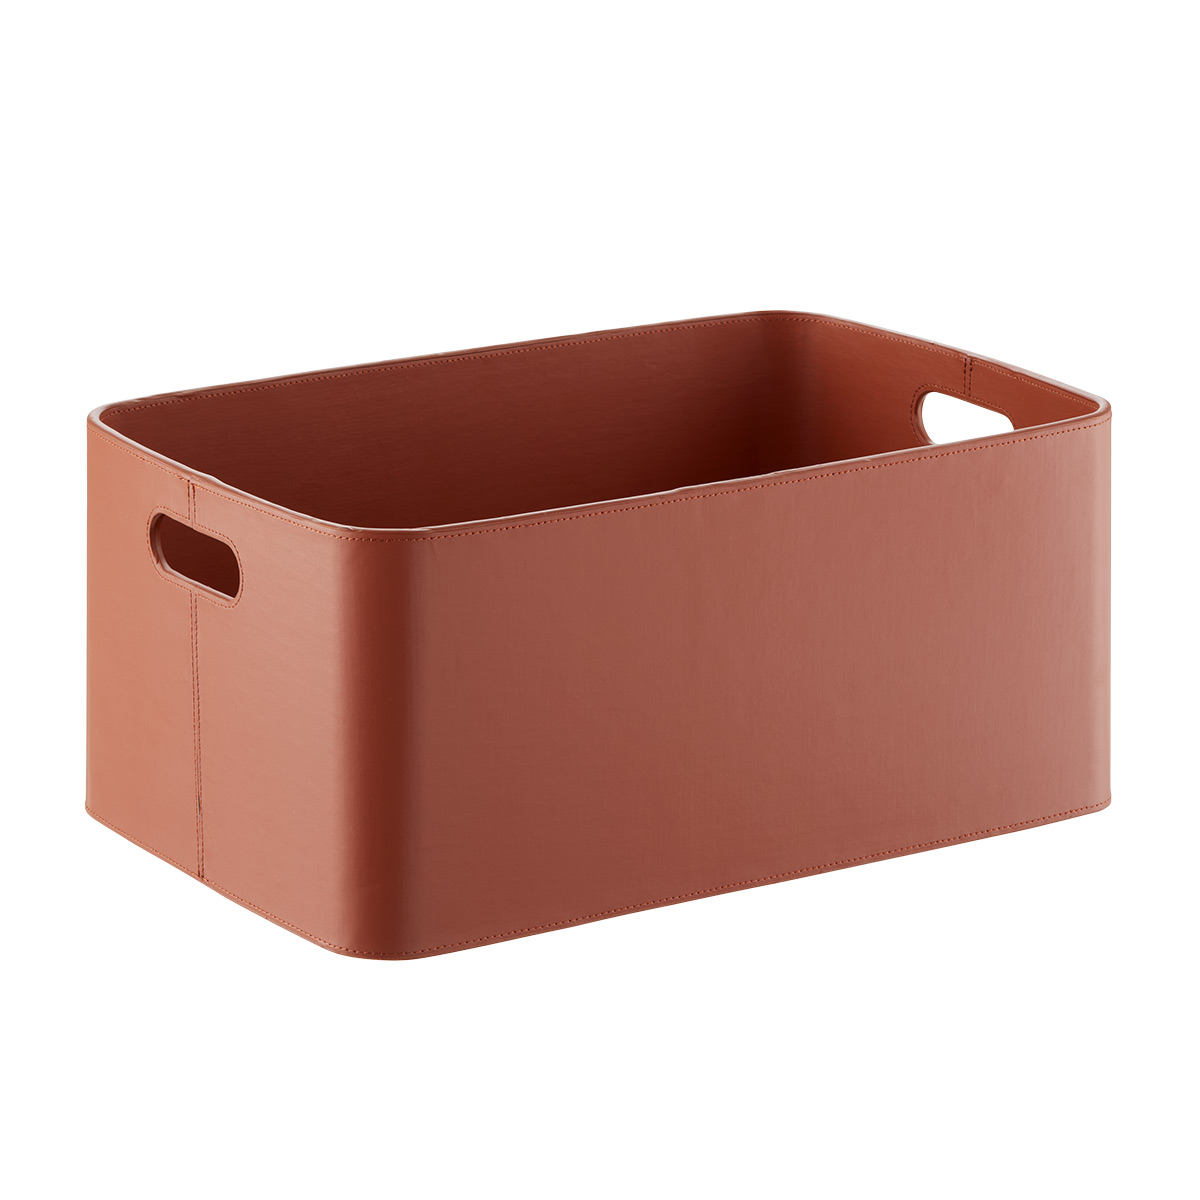 The Container Store Large Samson Faux Leather Bin Cognac